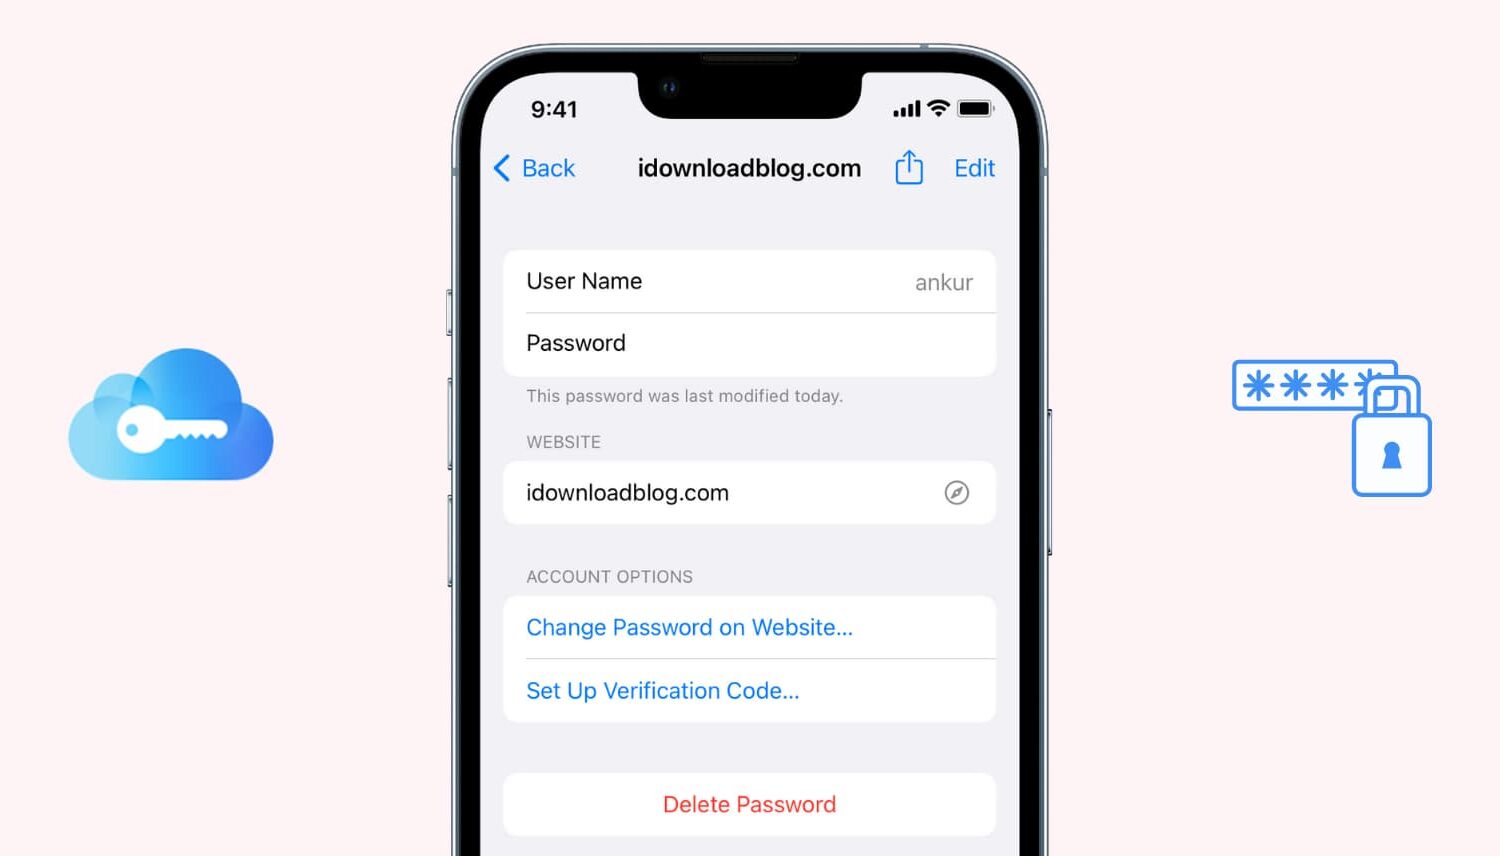 View passwords stored in iCloud Keychain on iPhone